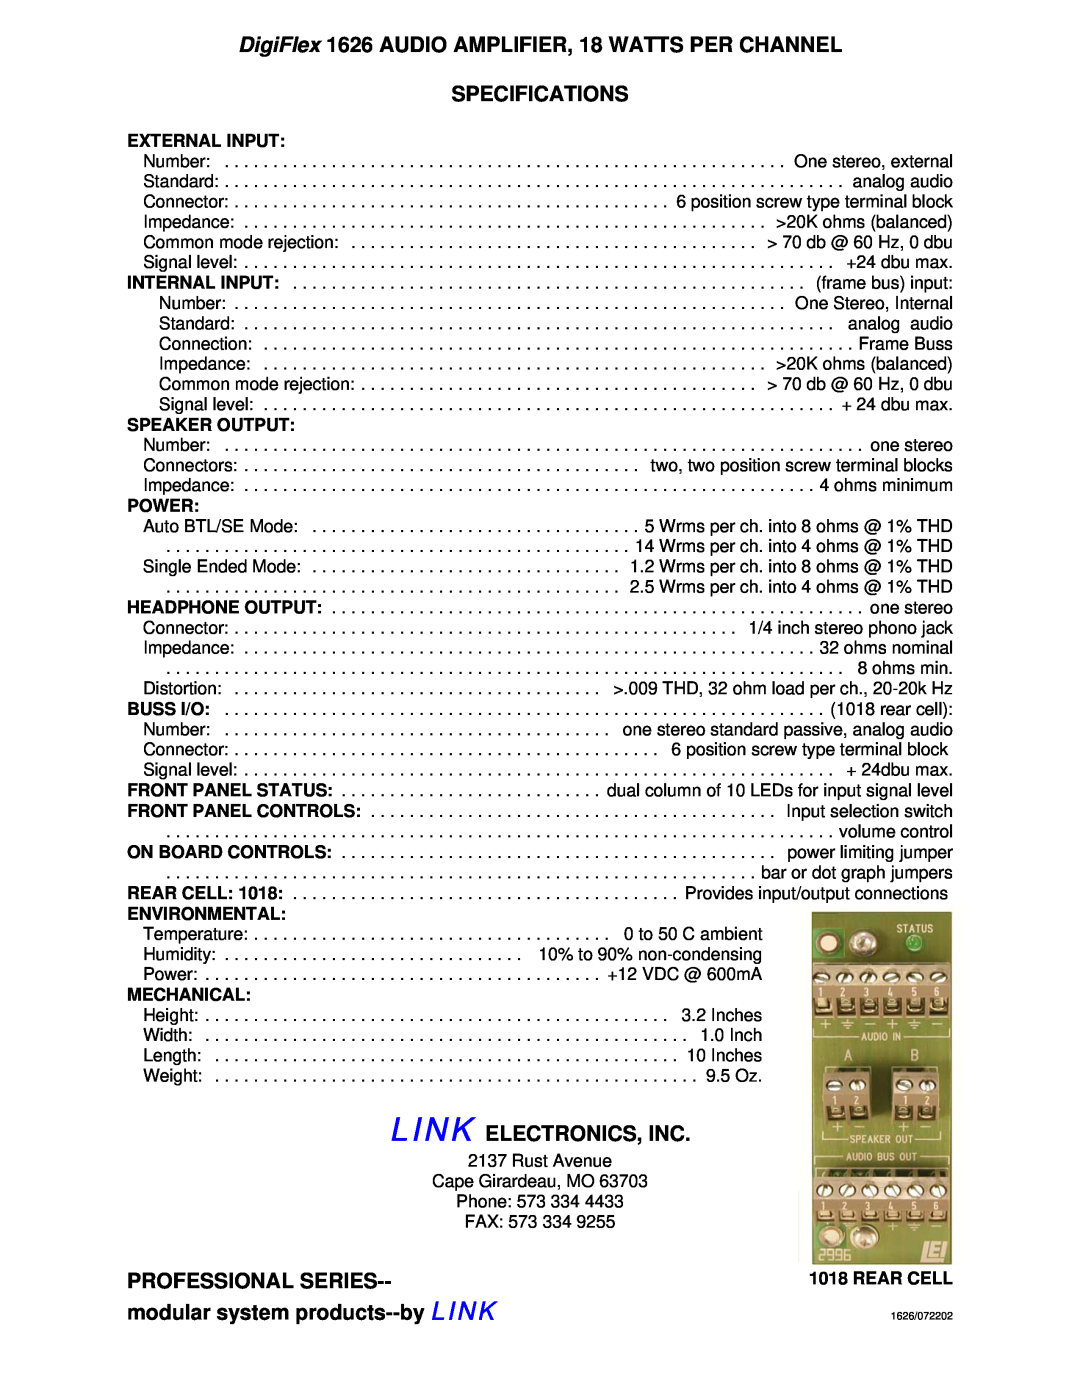 Link electronic 1626 Specifications, Link Electronics, Inc, Professional Series, modular system products--by LINK, Power 